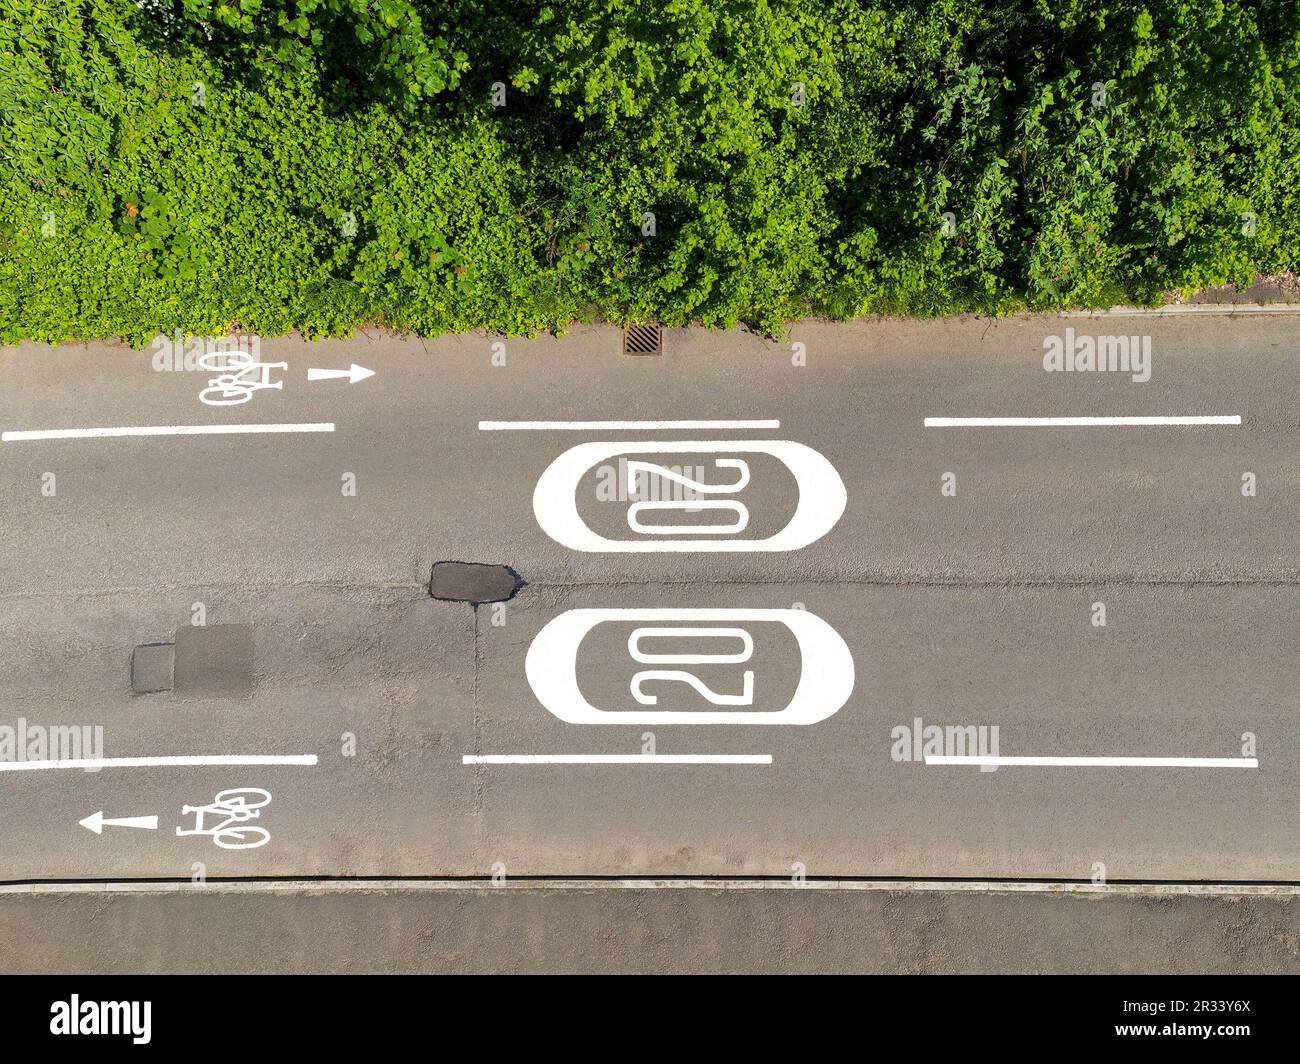 Aerial view of road markings for a 20 mph speed limit zone and cycle lanes. No people. Stock Photo